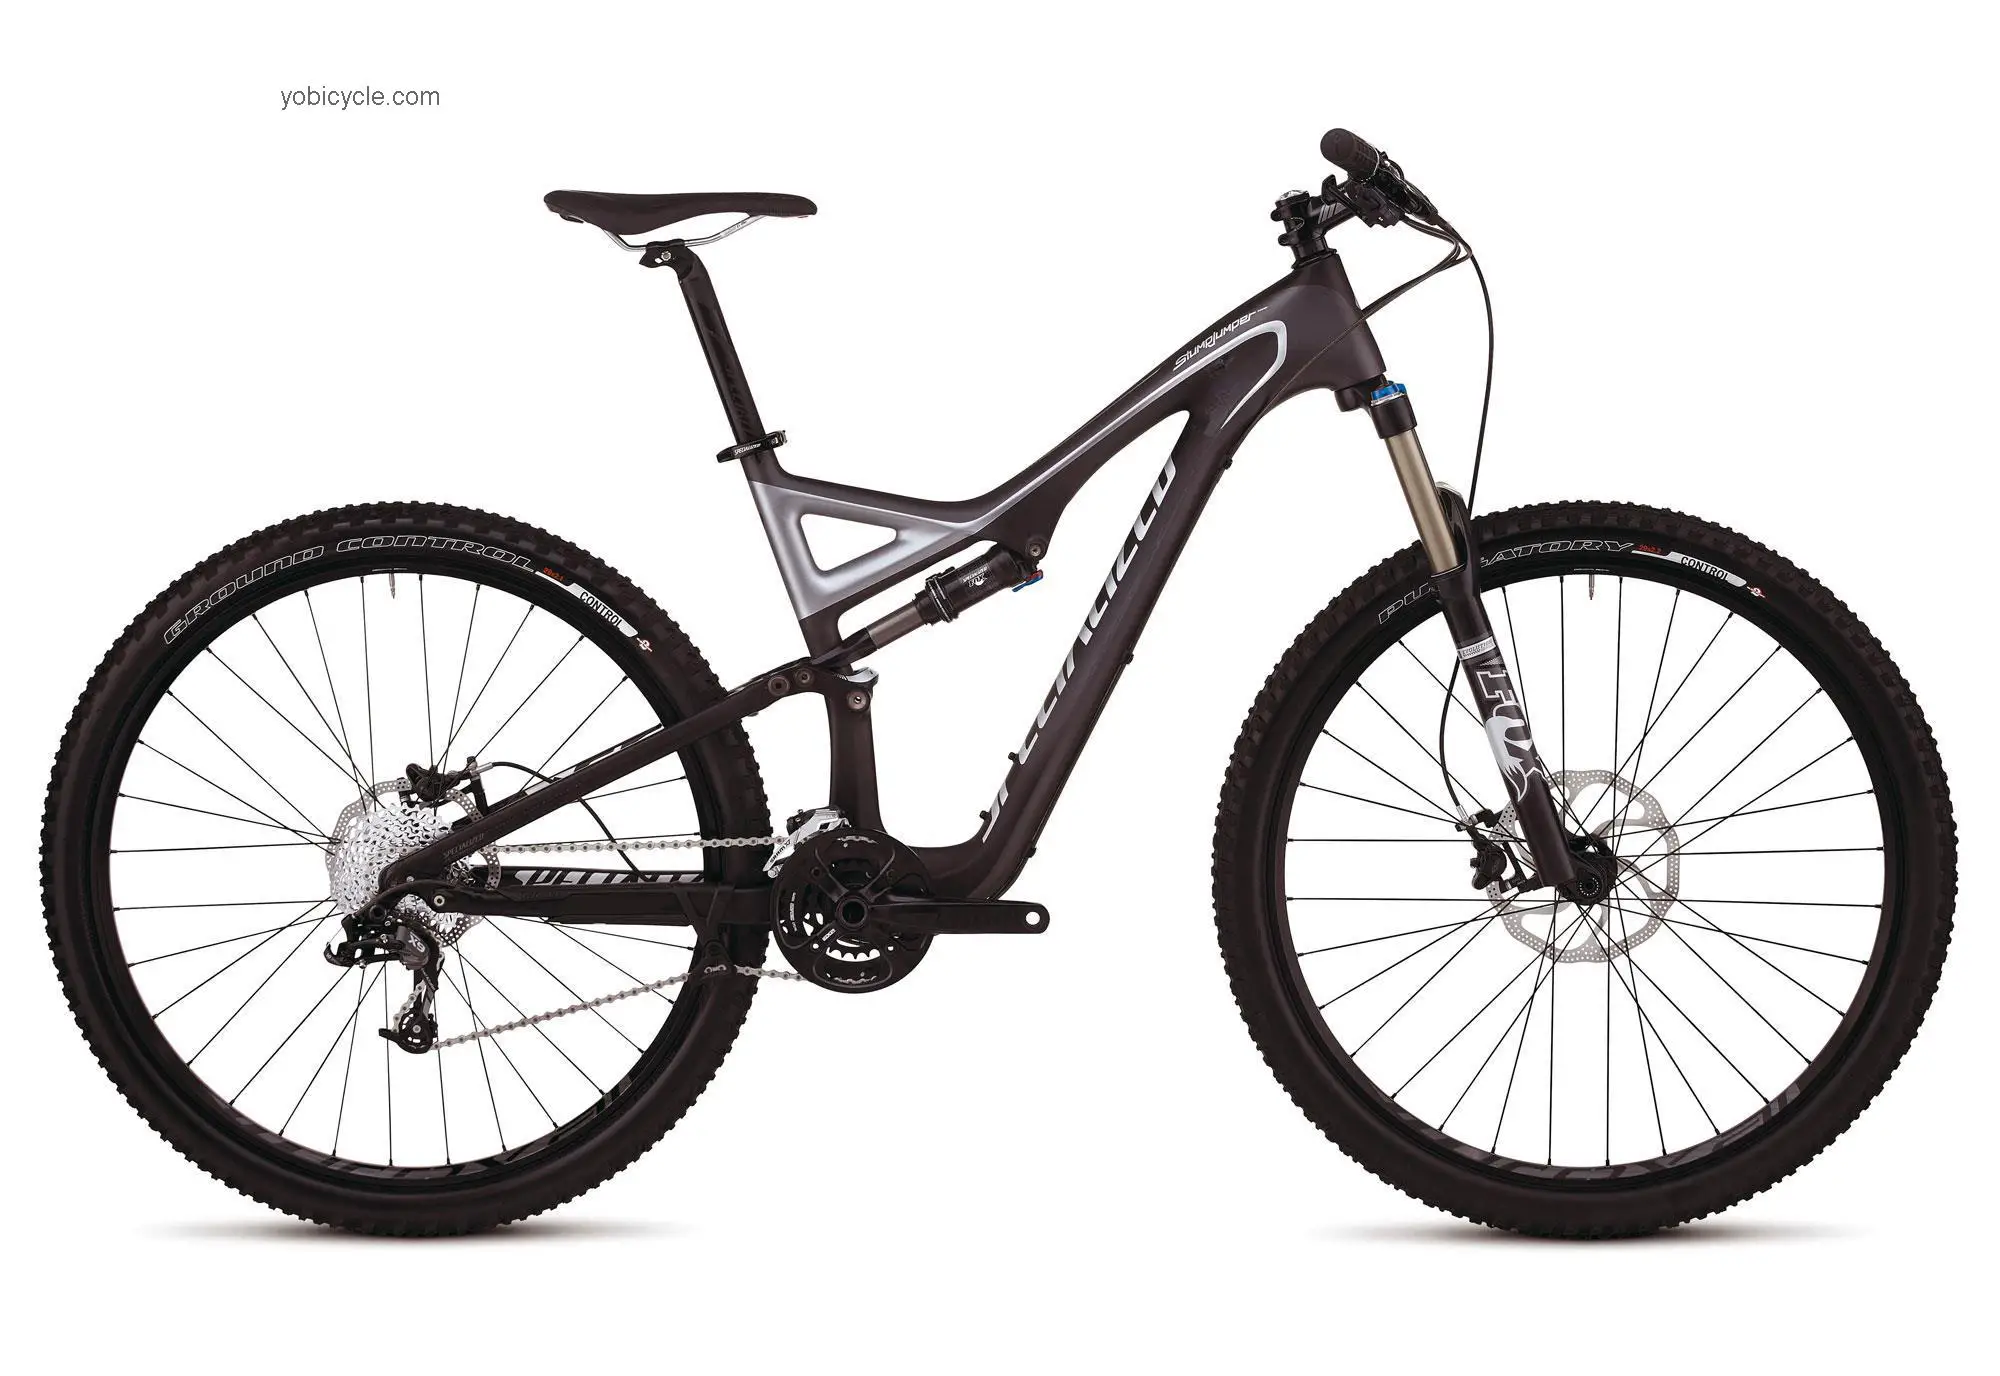 Specialized Stumpjumper FSR Comp Carbon 29 competitors and comparison tool online specs and performance